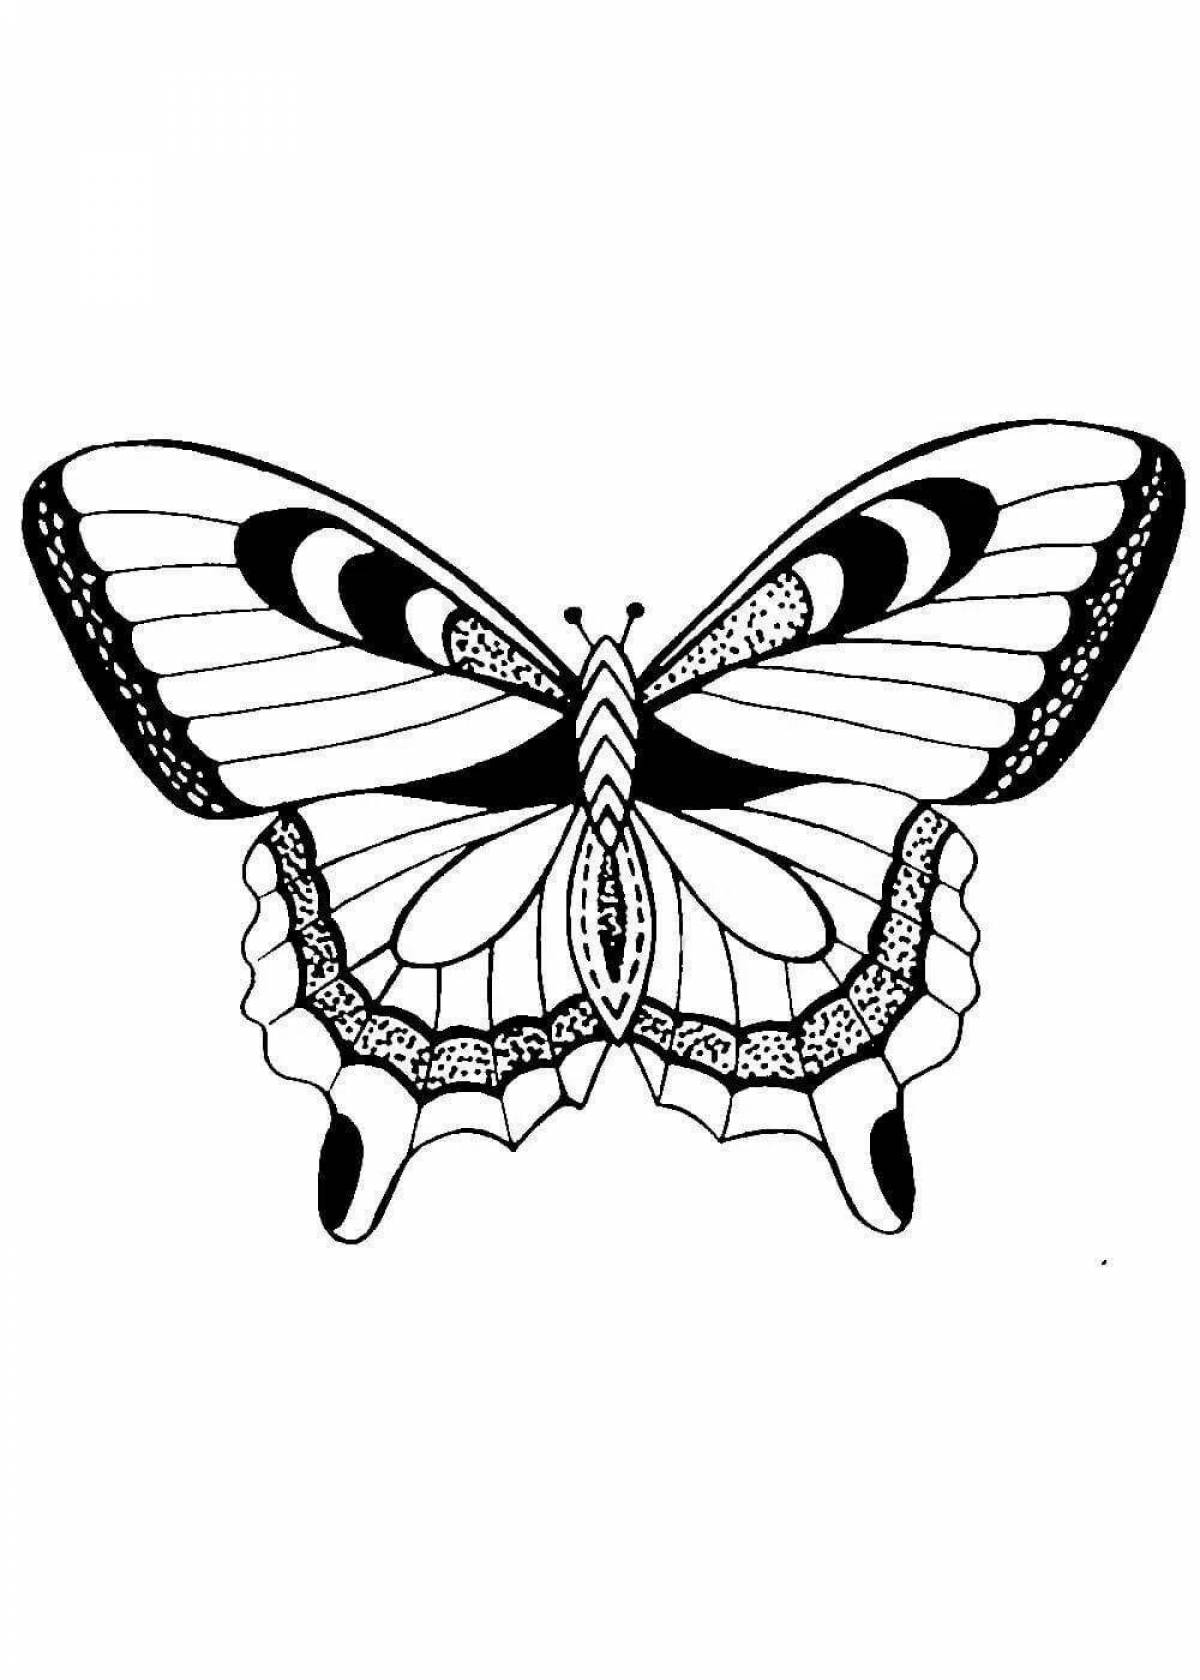 Bright butterfly stencil coloring